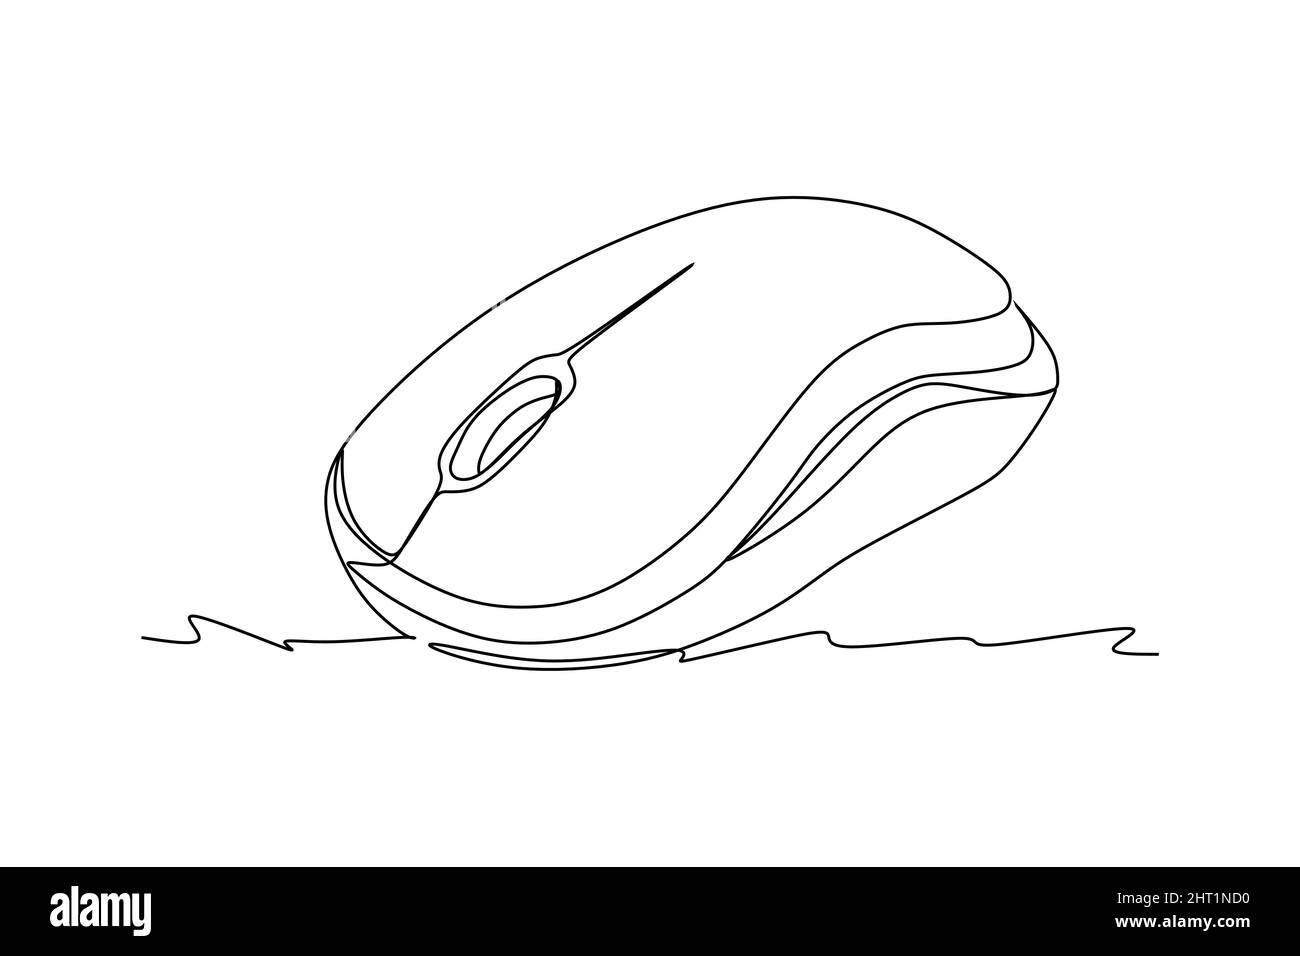 Computer Mouse Vector Stock Illustration  Download Image Now  Australia  Black And White Blank  iStock